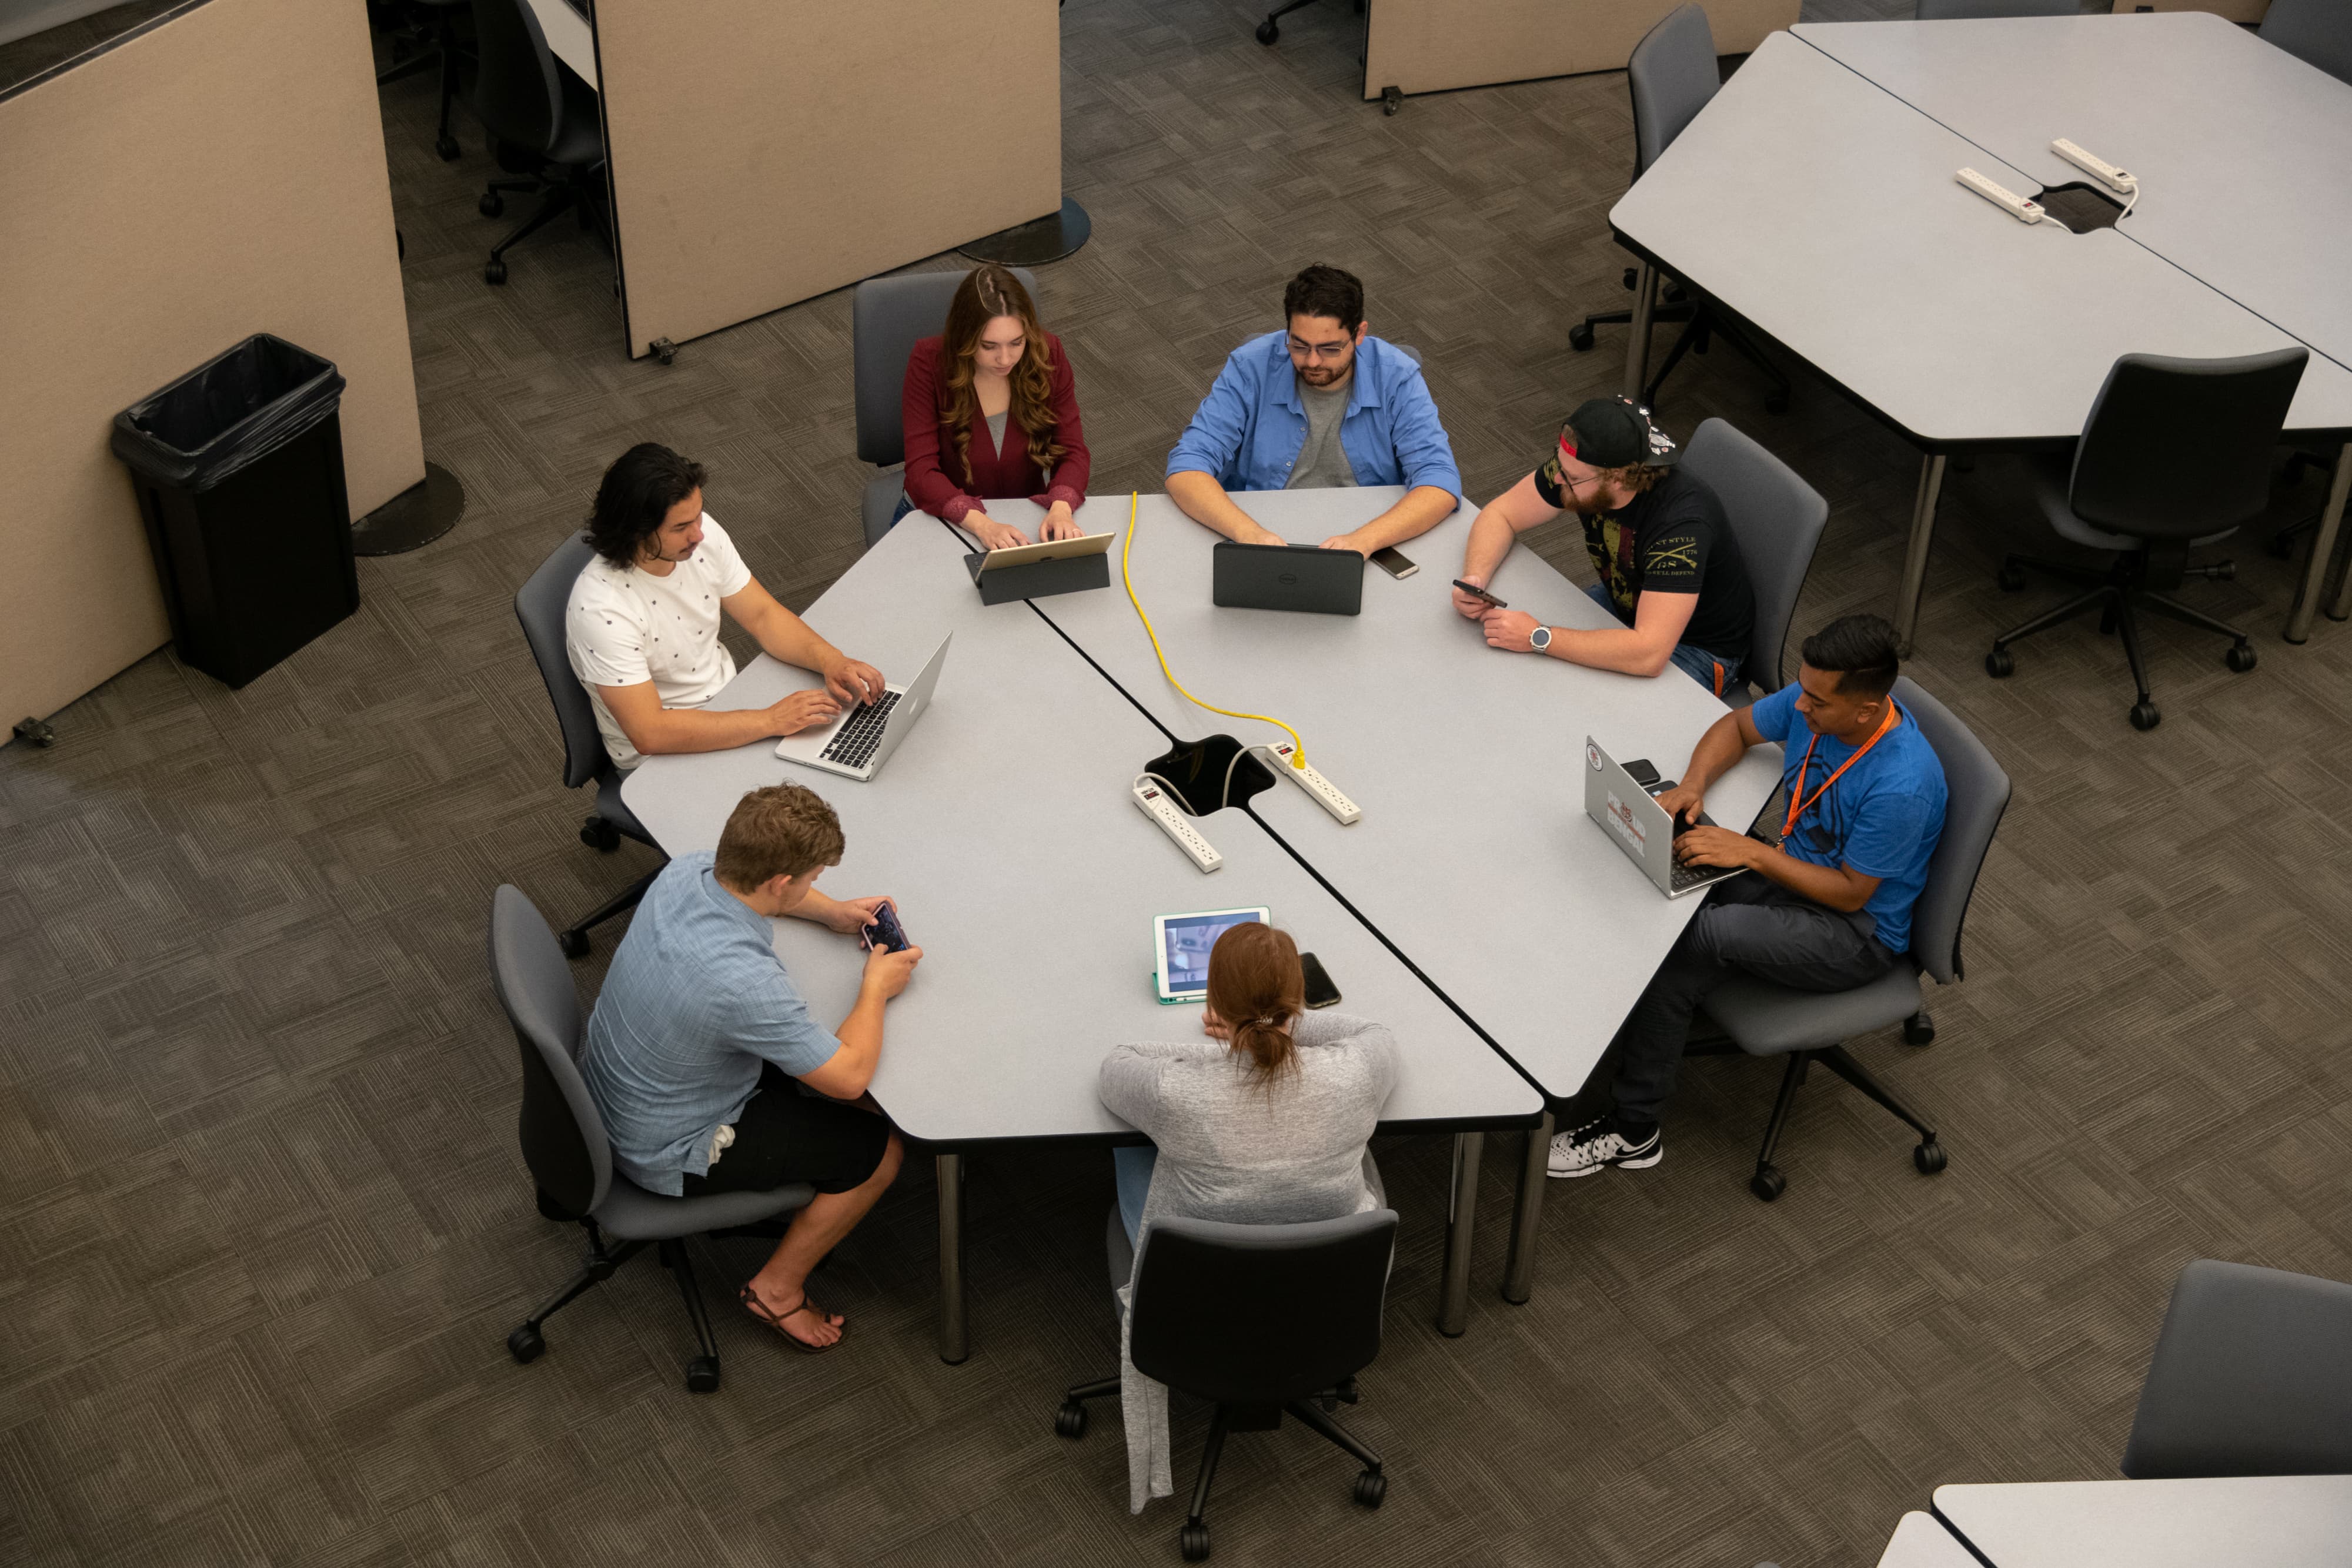 Above shot, a group of students talking around a circular table.